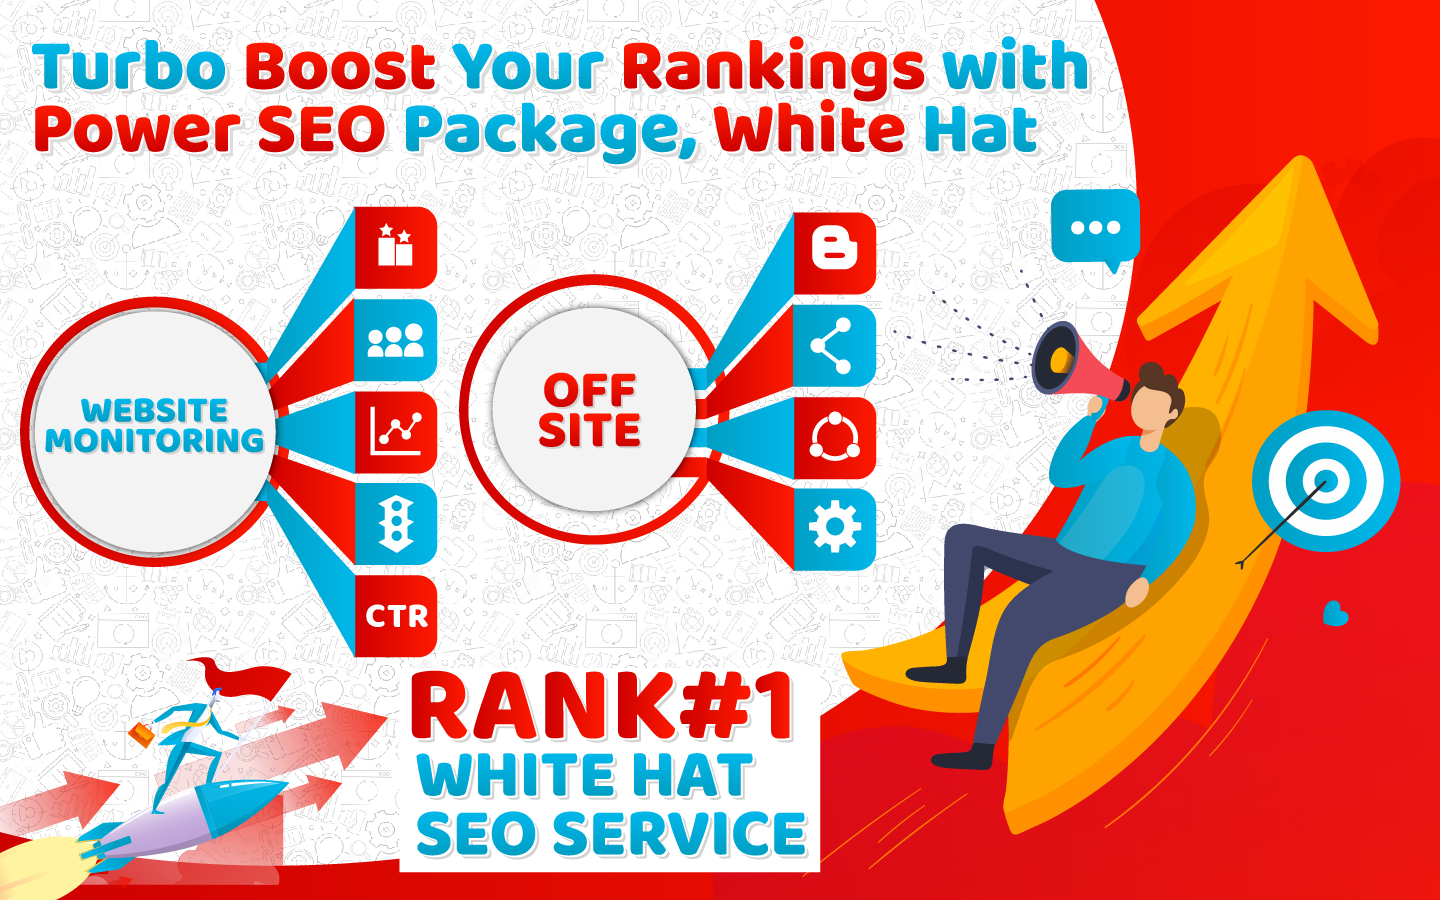 Turbo Boost Your Rankings with Power SEO Package, White Hat Links